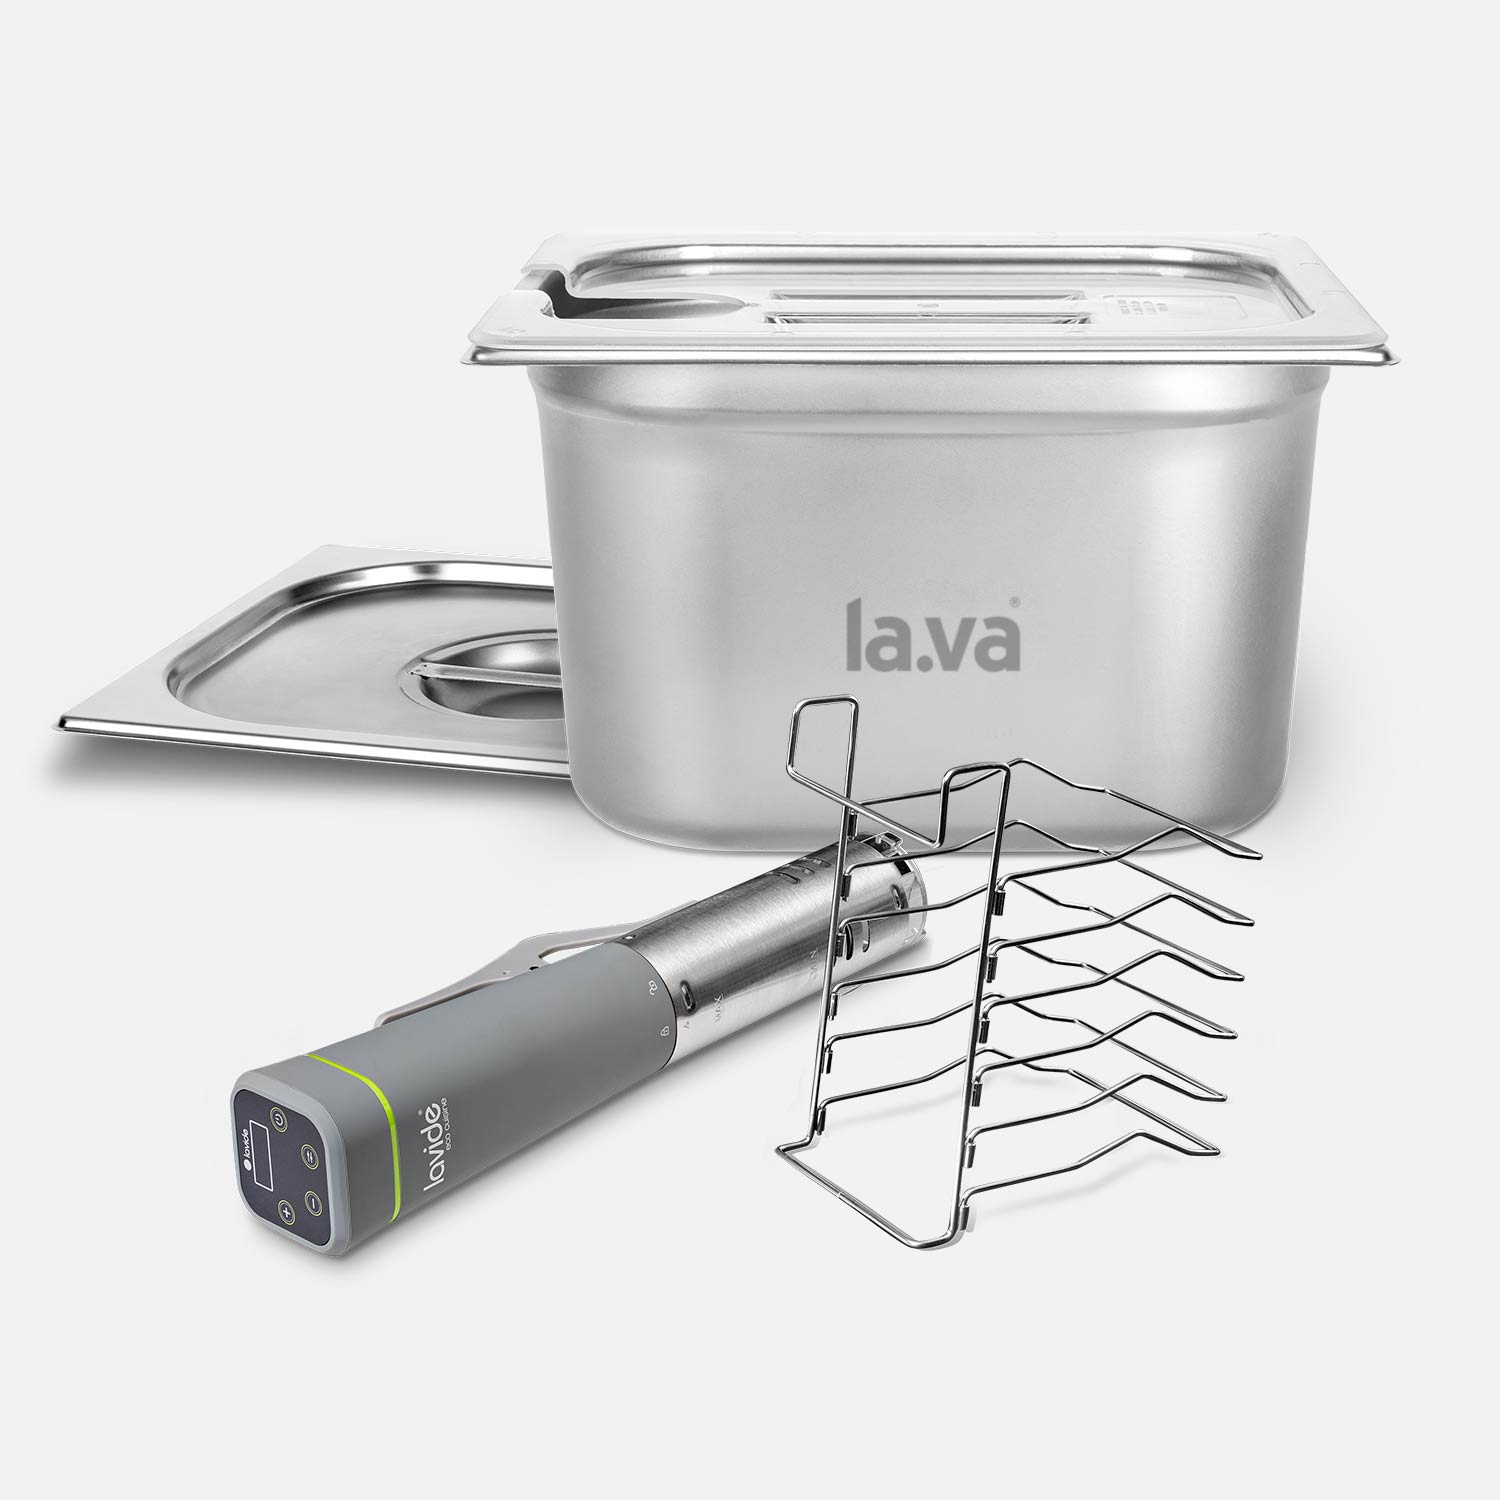 Sous-vide-set XXL stainless steel, consisting of a sous-vide stick, 12-liter stainless steel container with lid, plastic lid, bag holder, and insulation sleeve